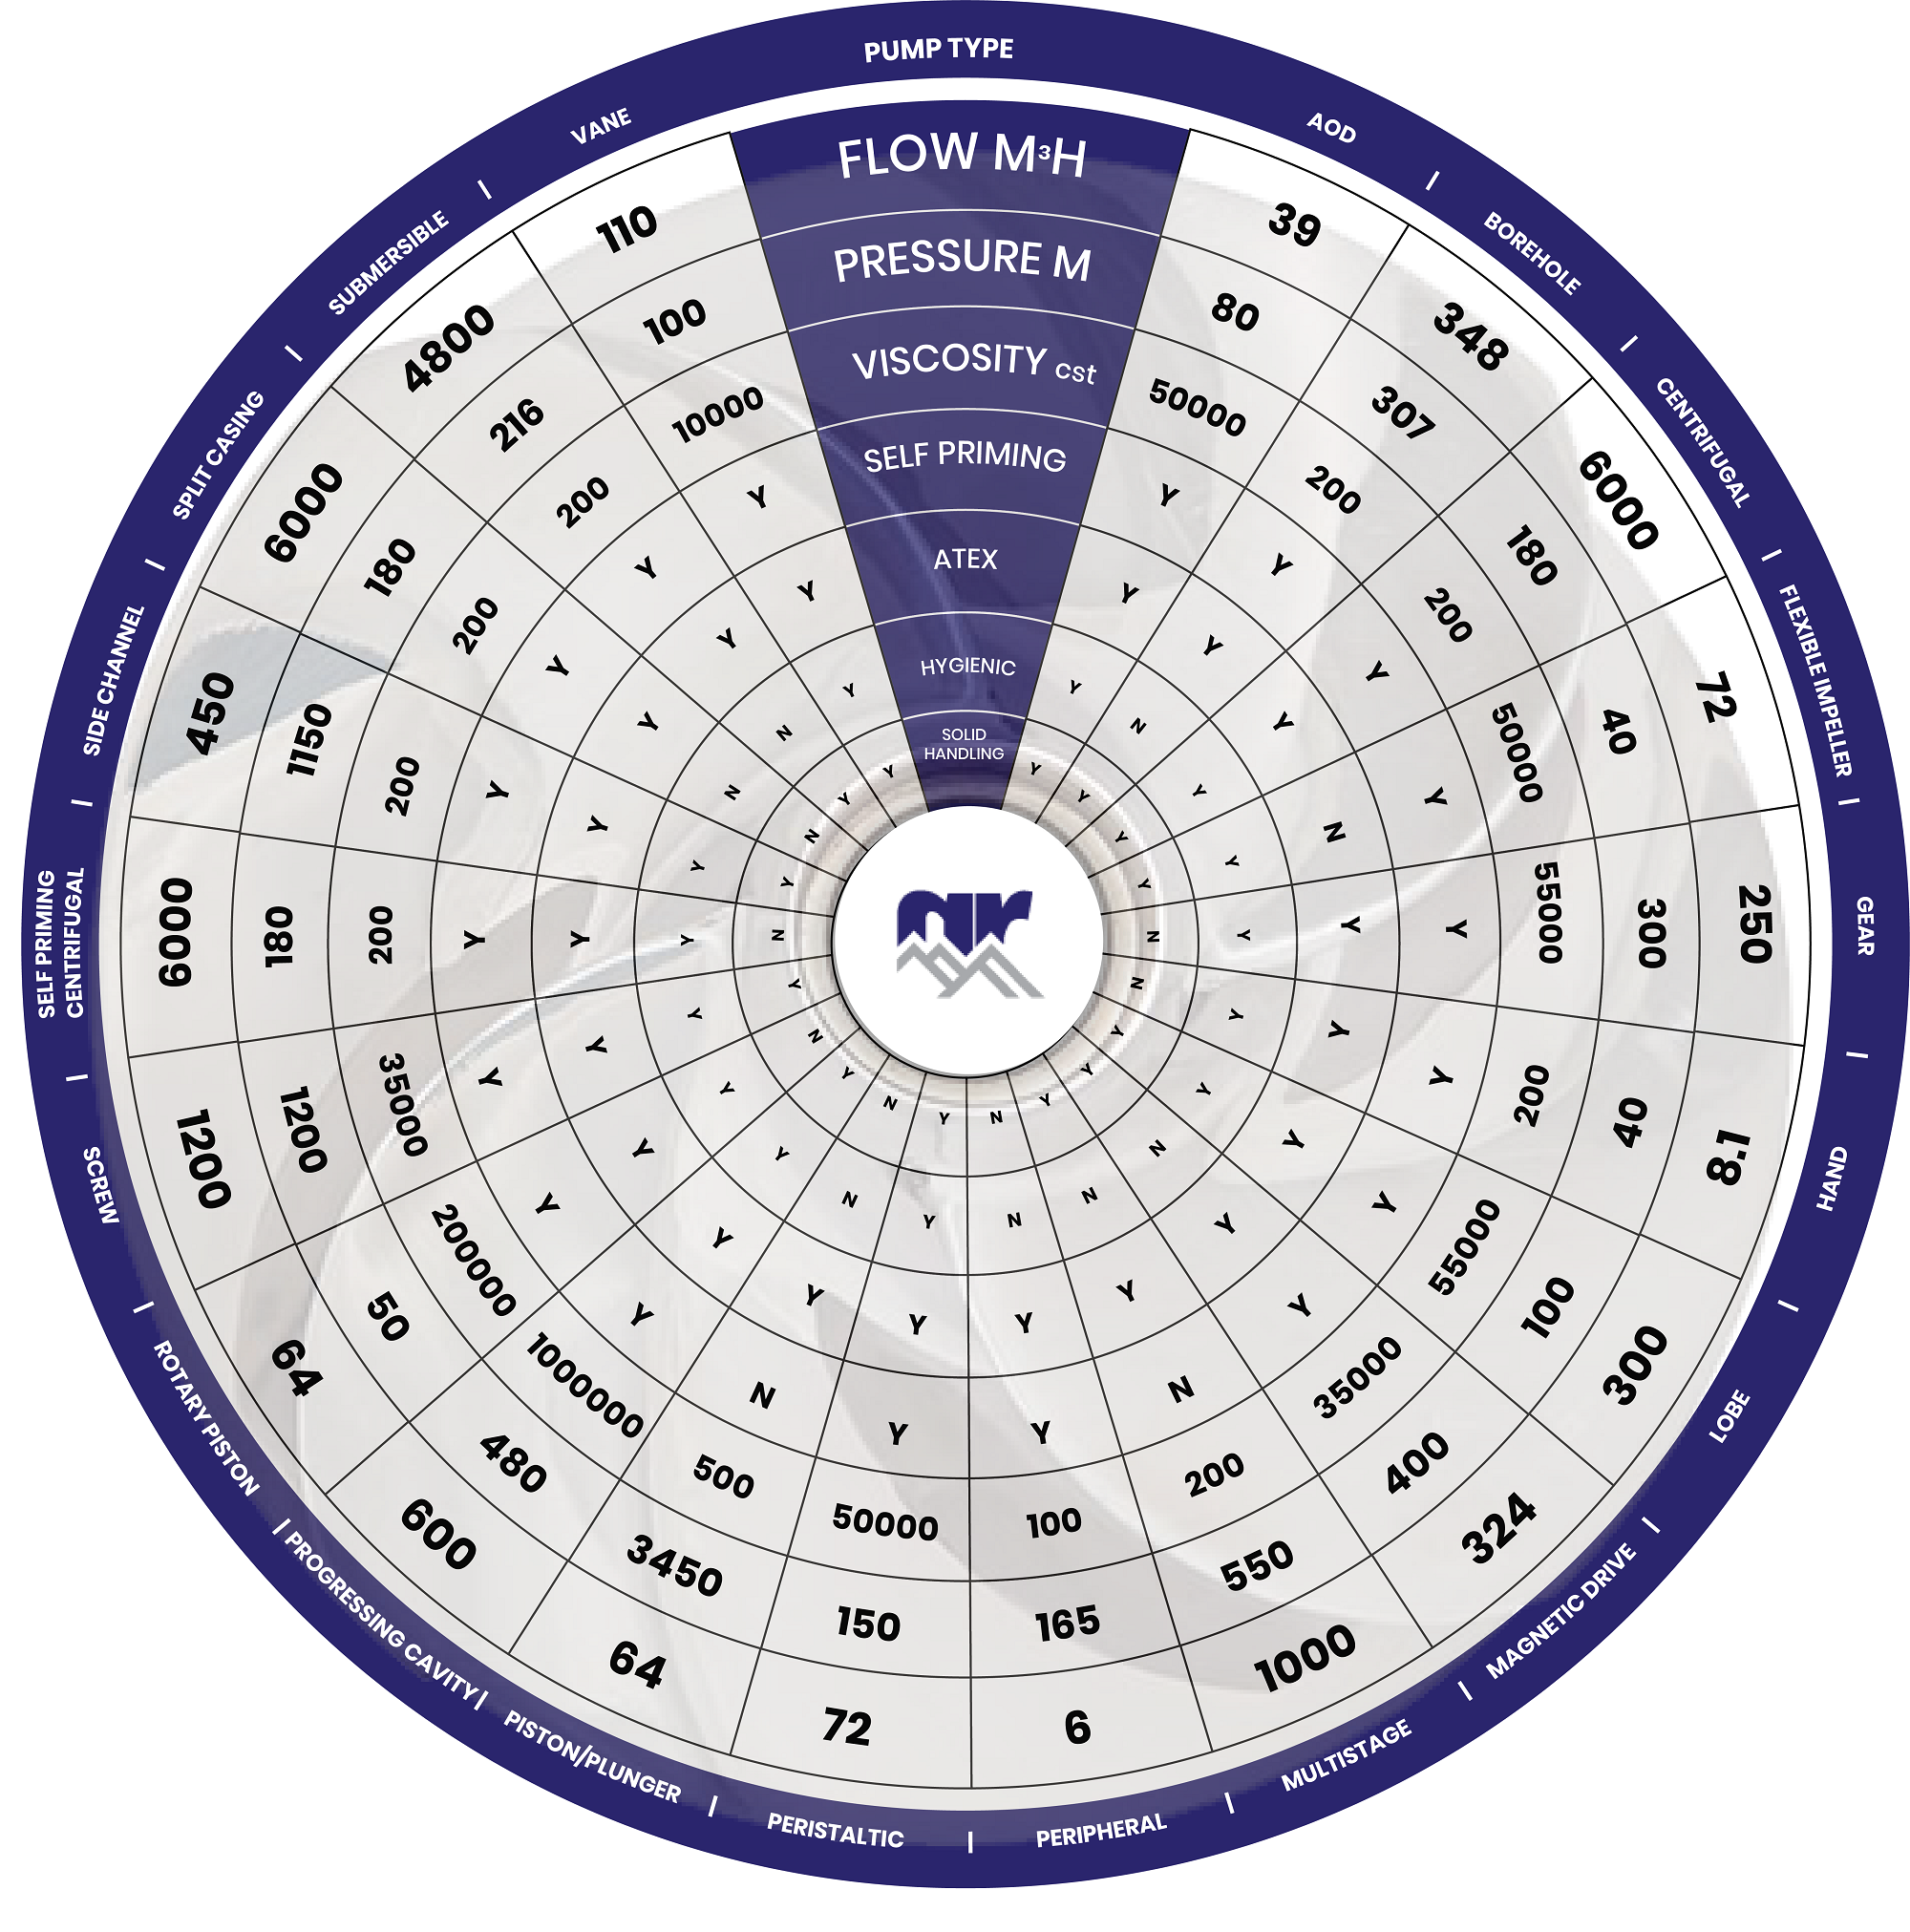 The Pump Selection Wheel gives an overview of different pump types available for any given application.